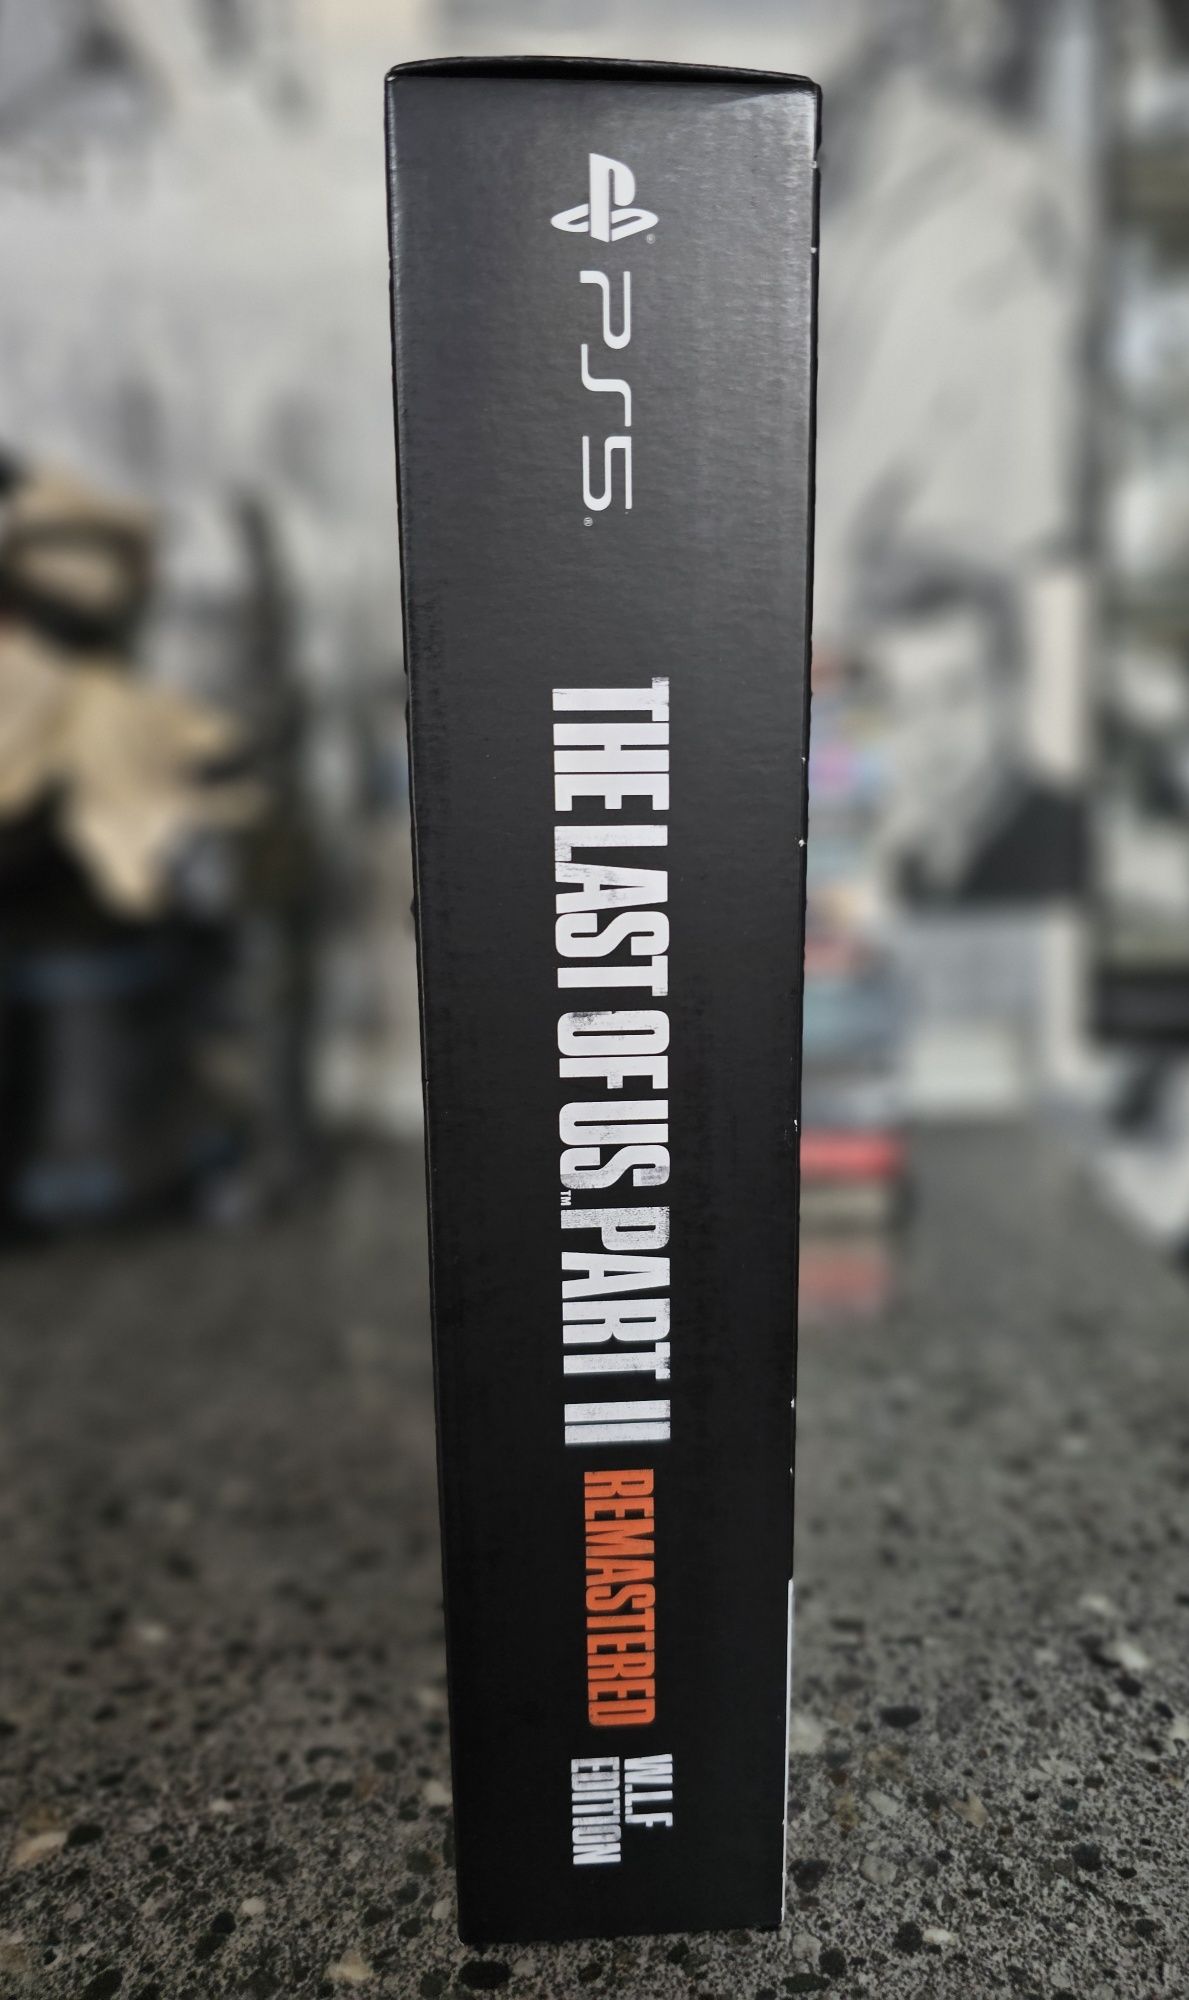 The Last of Us Part II - 2 Remastered Collectors edition Steelbook PS5